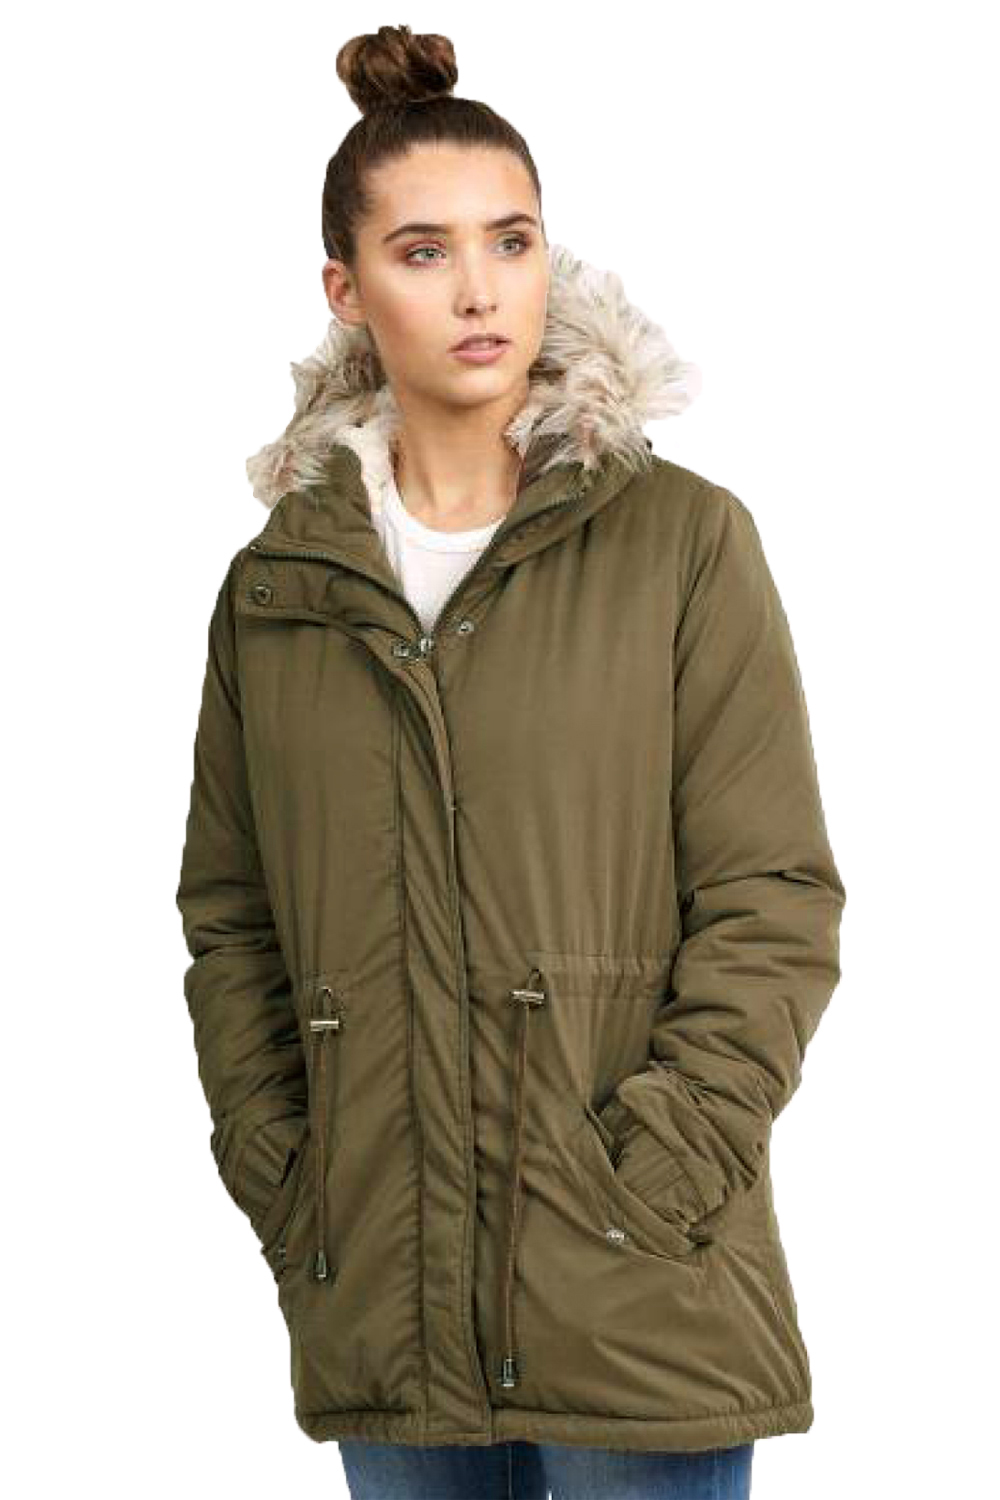 WOMENS LADIES BRAVE SOUL MILITARY LINED FUR HOODED PARKA JACKET WARM WINTER COAT